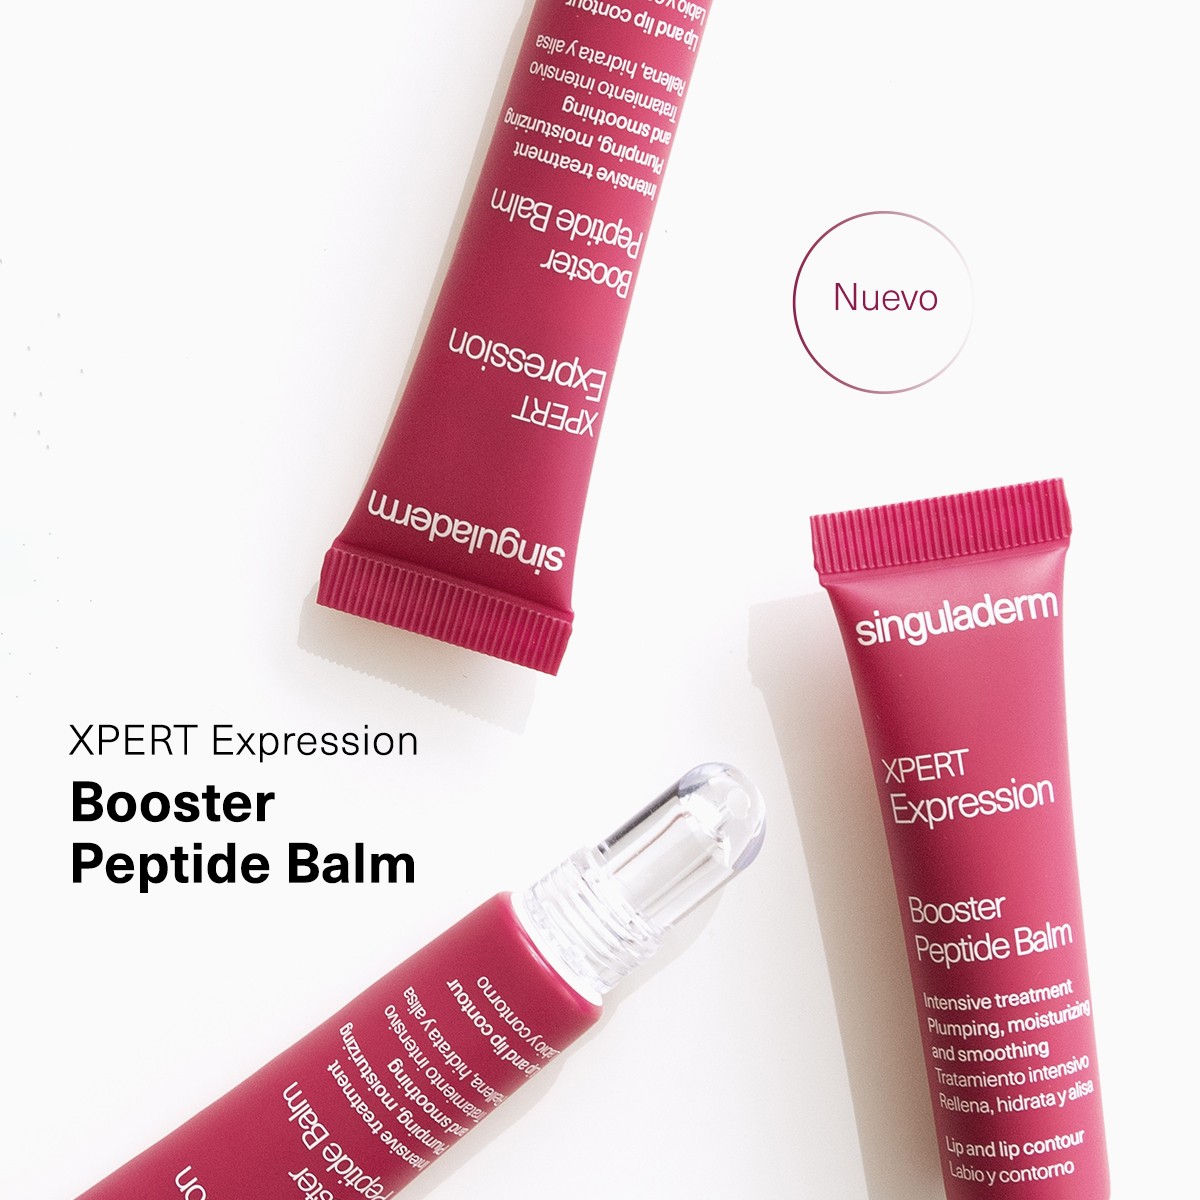 SINGULADERM XPERT Expression Booster Peptide Balm